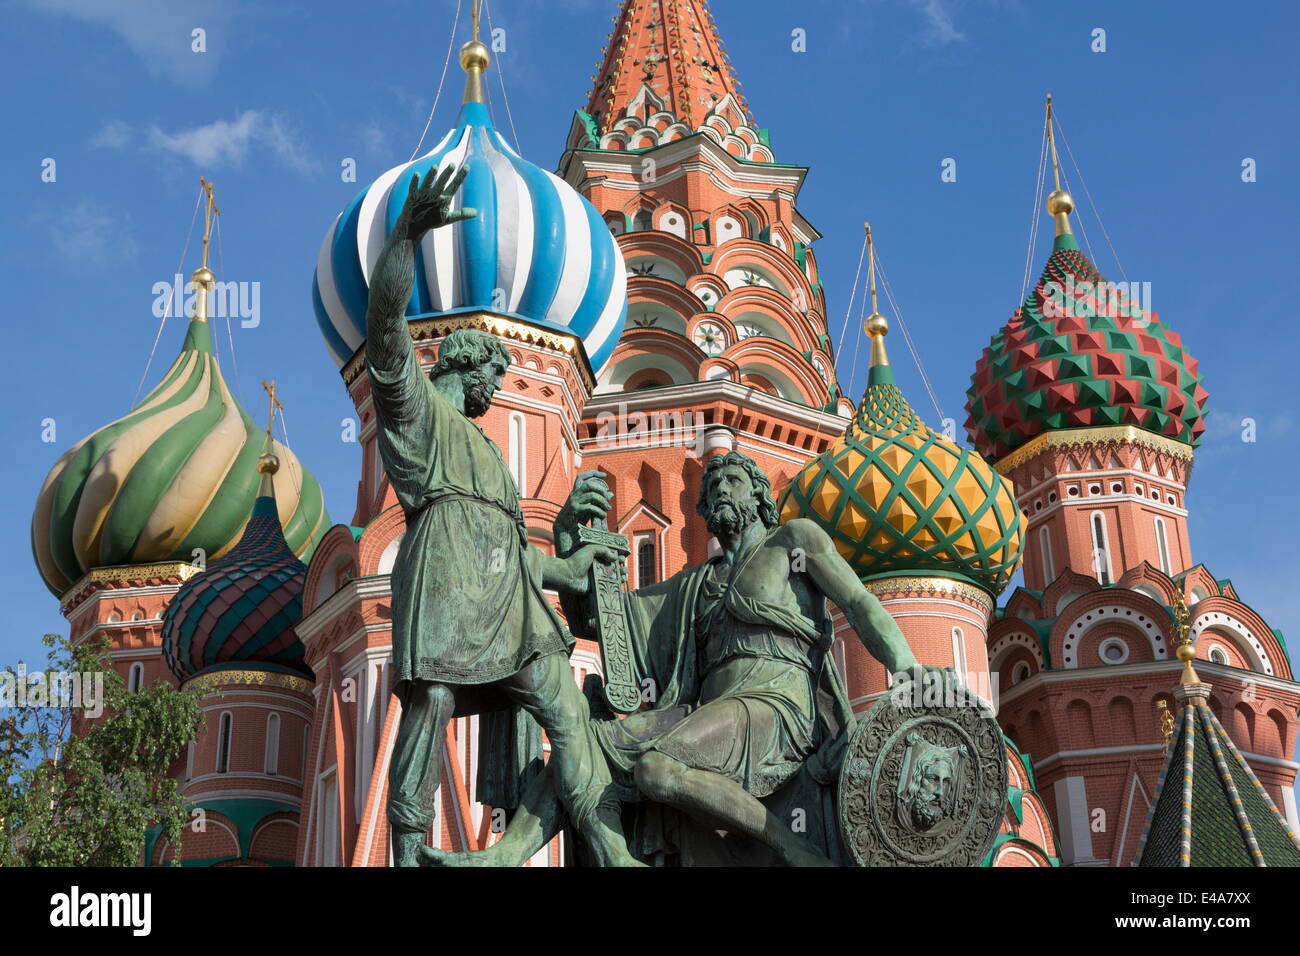 Statue of Minin and Pozharskiy and the onion domes of St. Basil's Cathedral in Red Square, UNESCO, Moscow, Russia Stock Photo